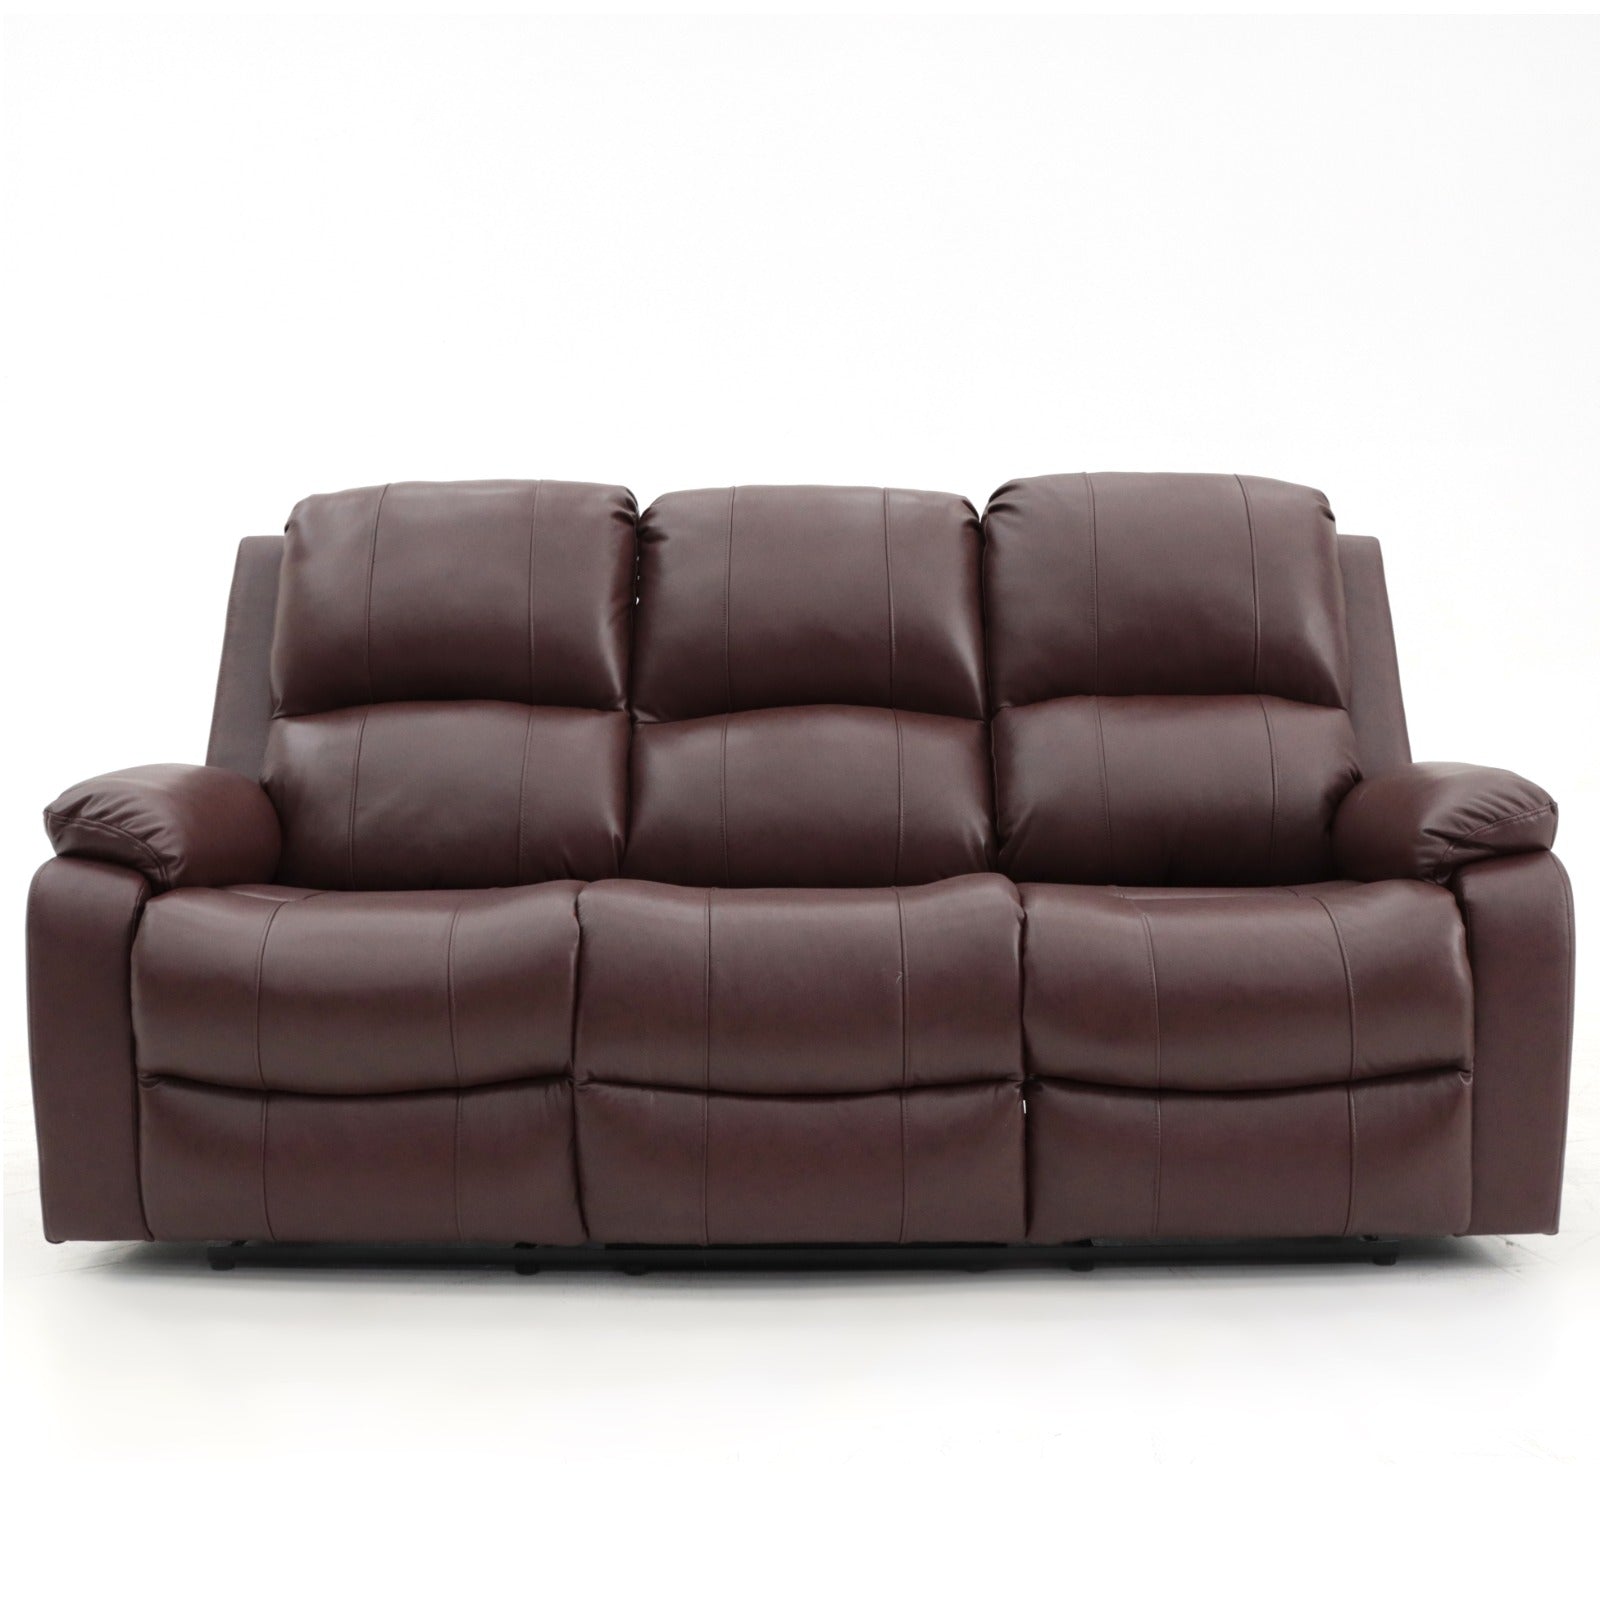 Aston 3 Seater Manual Recliner Chestnut Leather